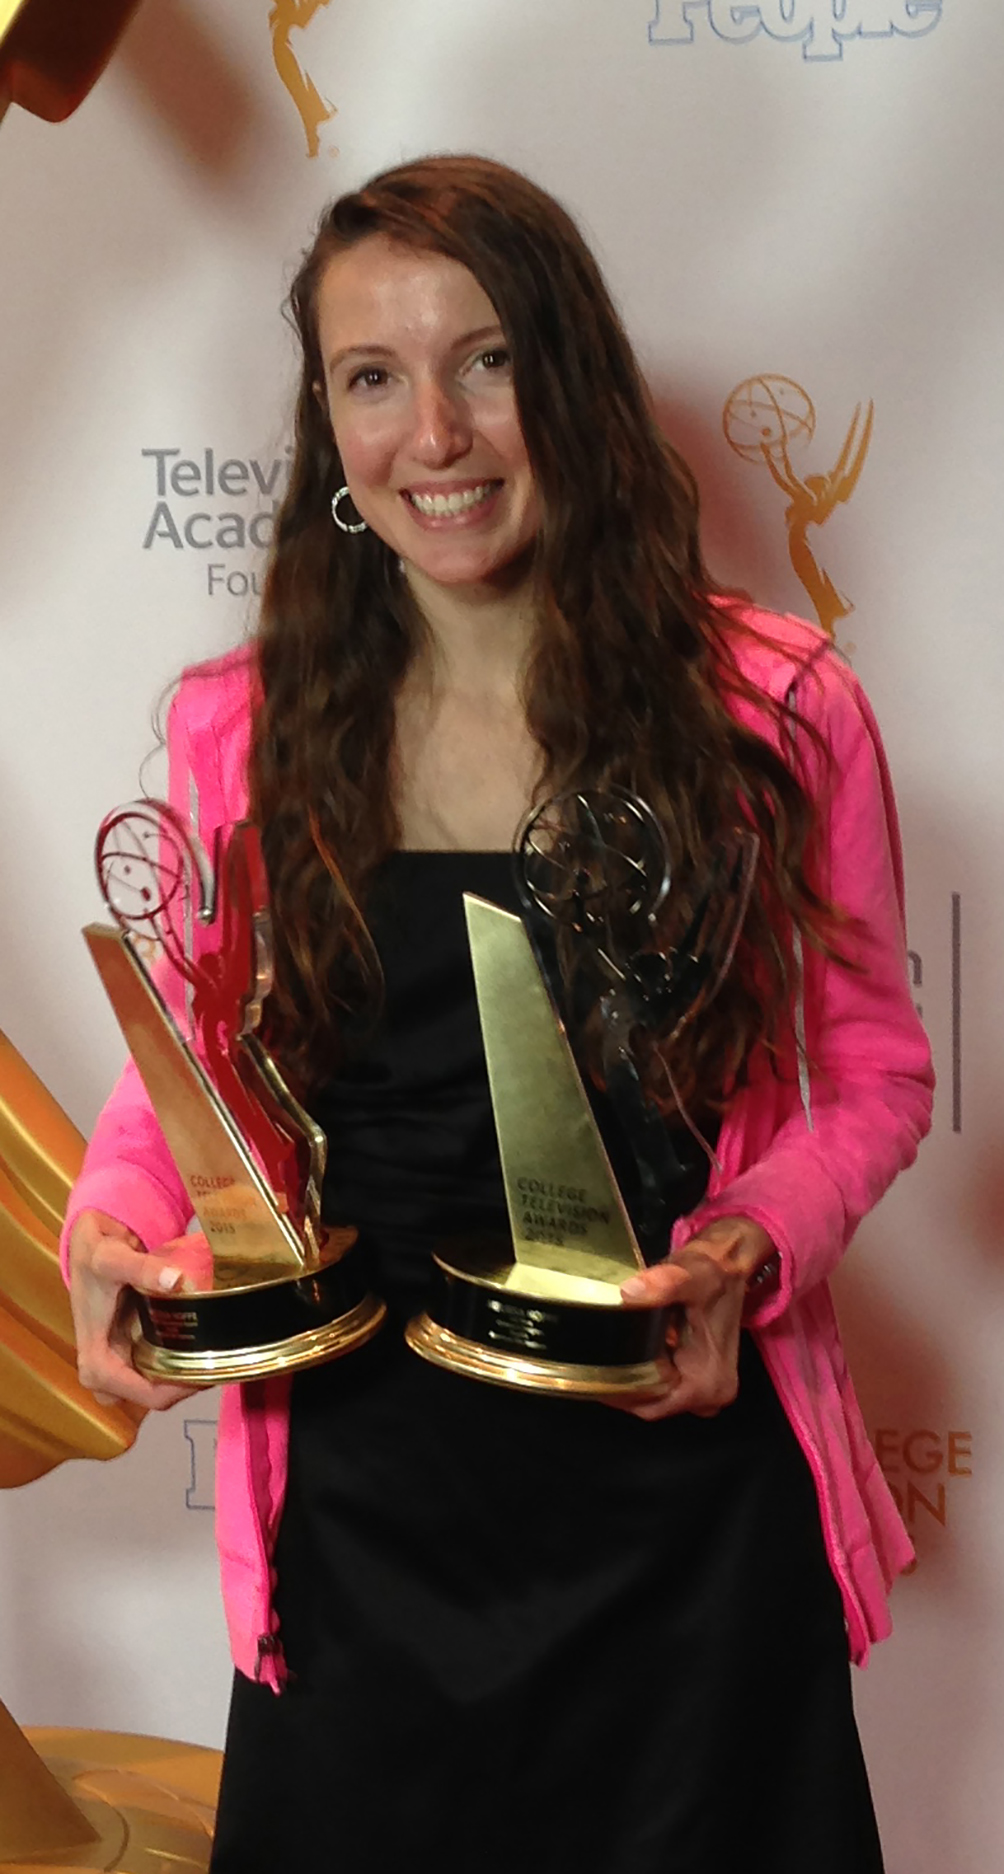 Melissa took home two Emmys from the College Television Awards ceremony in Los Angeles on April 23, 2015.